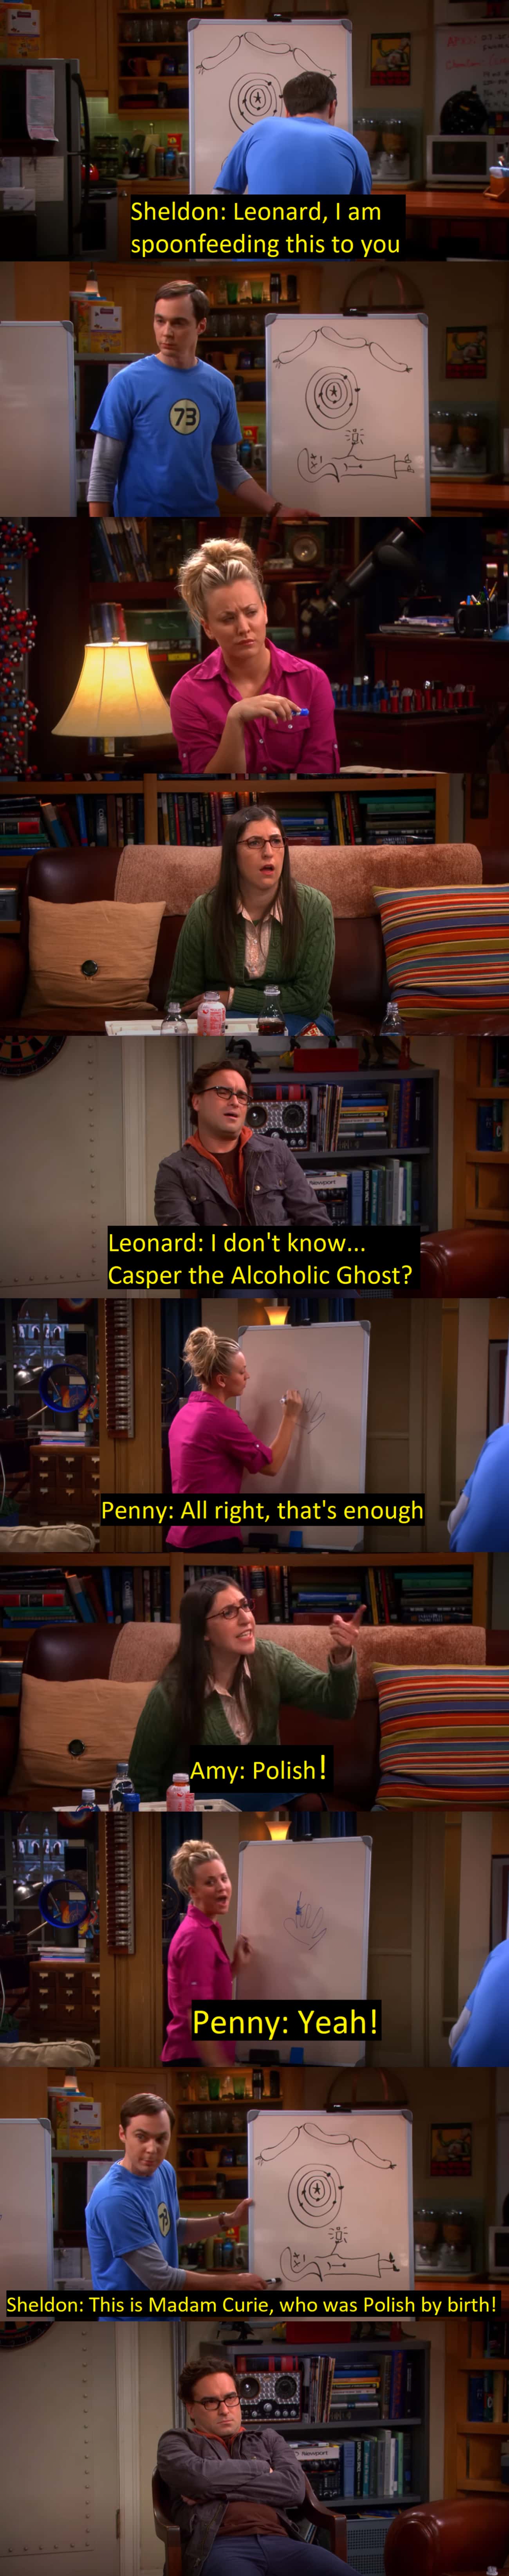 Contrast Between Sheldon And Penny's Pictionary Skills